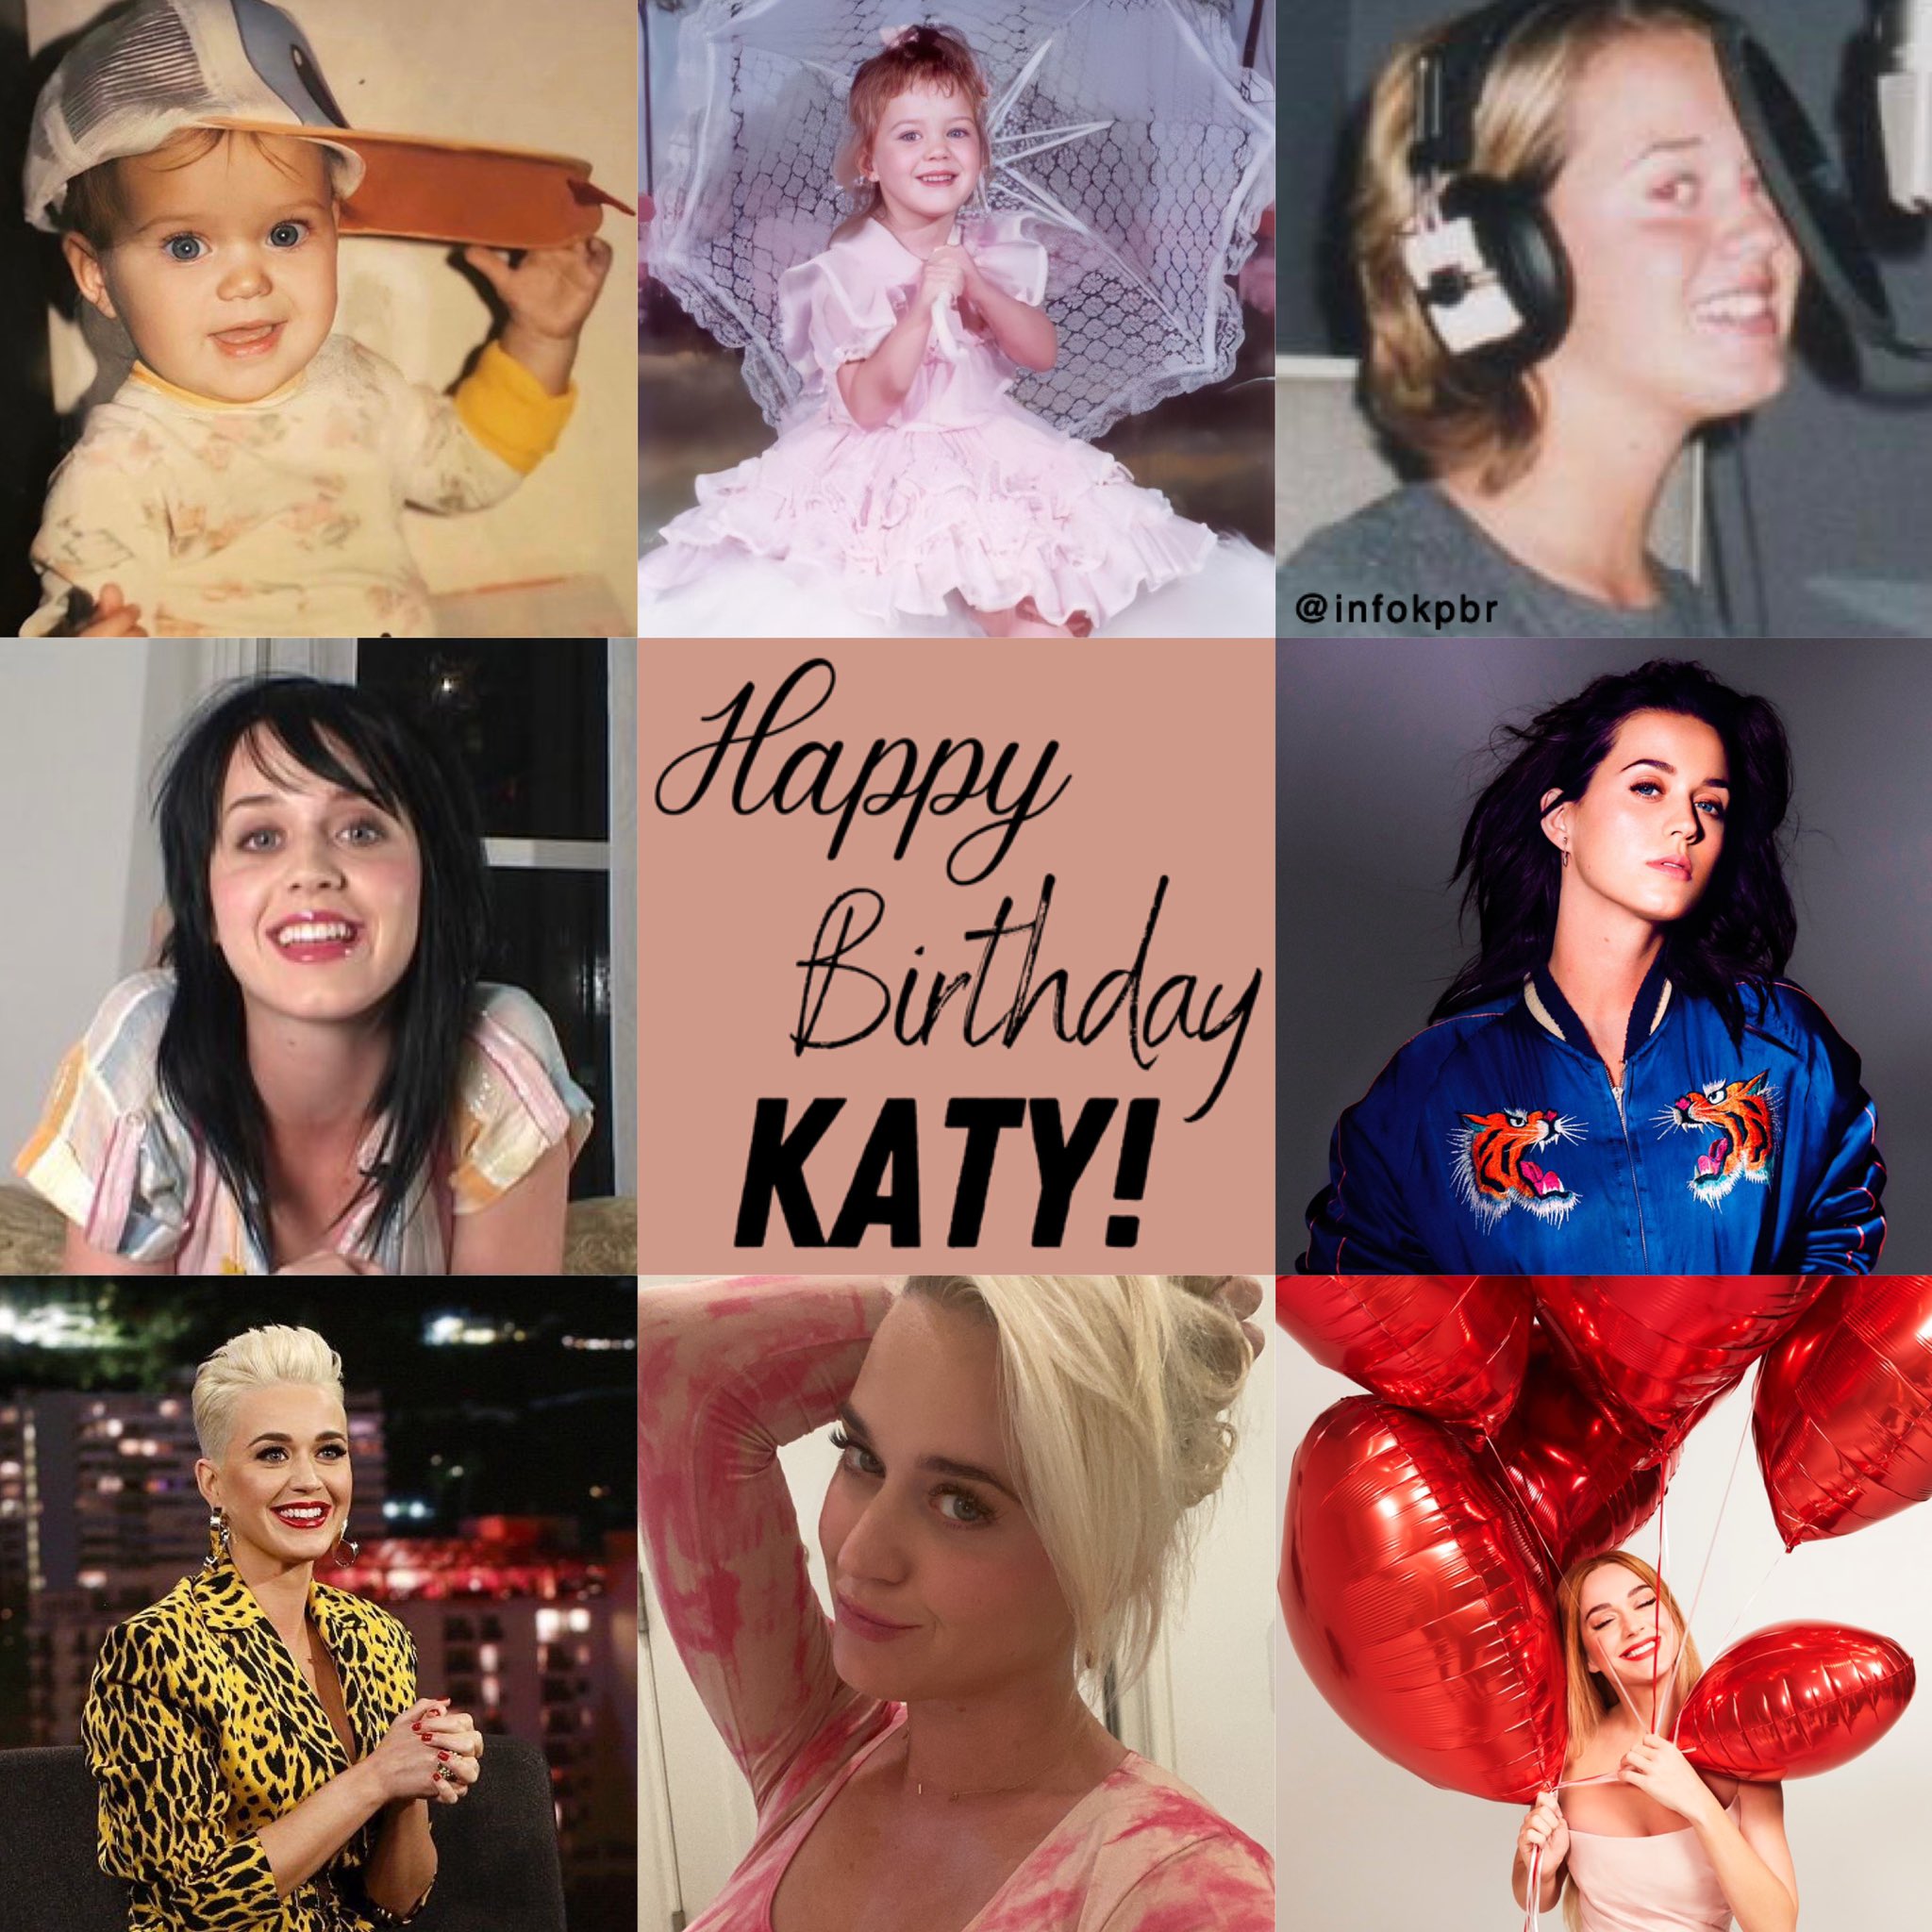 Info Katy Perry Brasil on X: "Happy Birthday Katy Perry!❤️ Katheryn, we thank you so much for all your dedication and love that you give over this years. You bring light, strength,